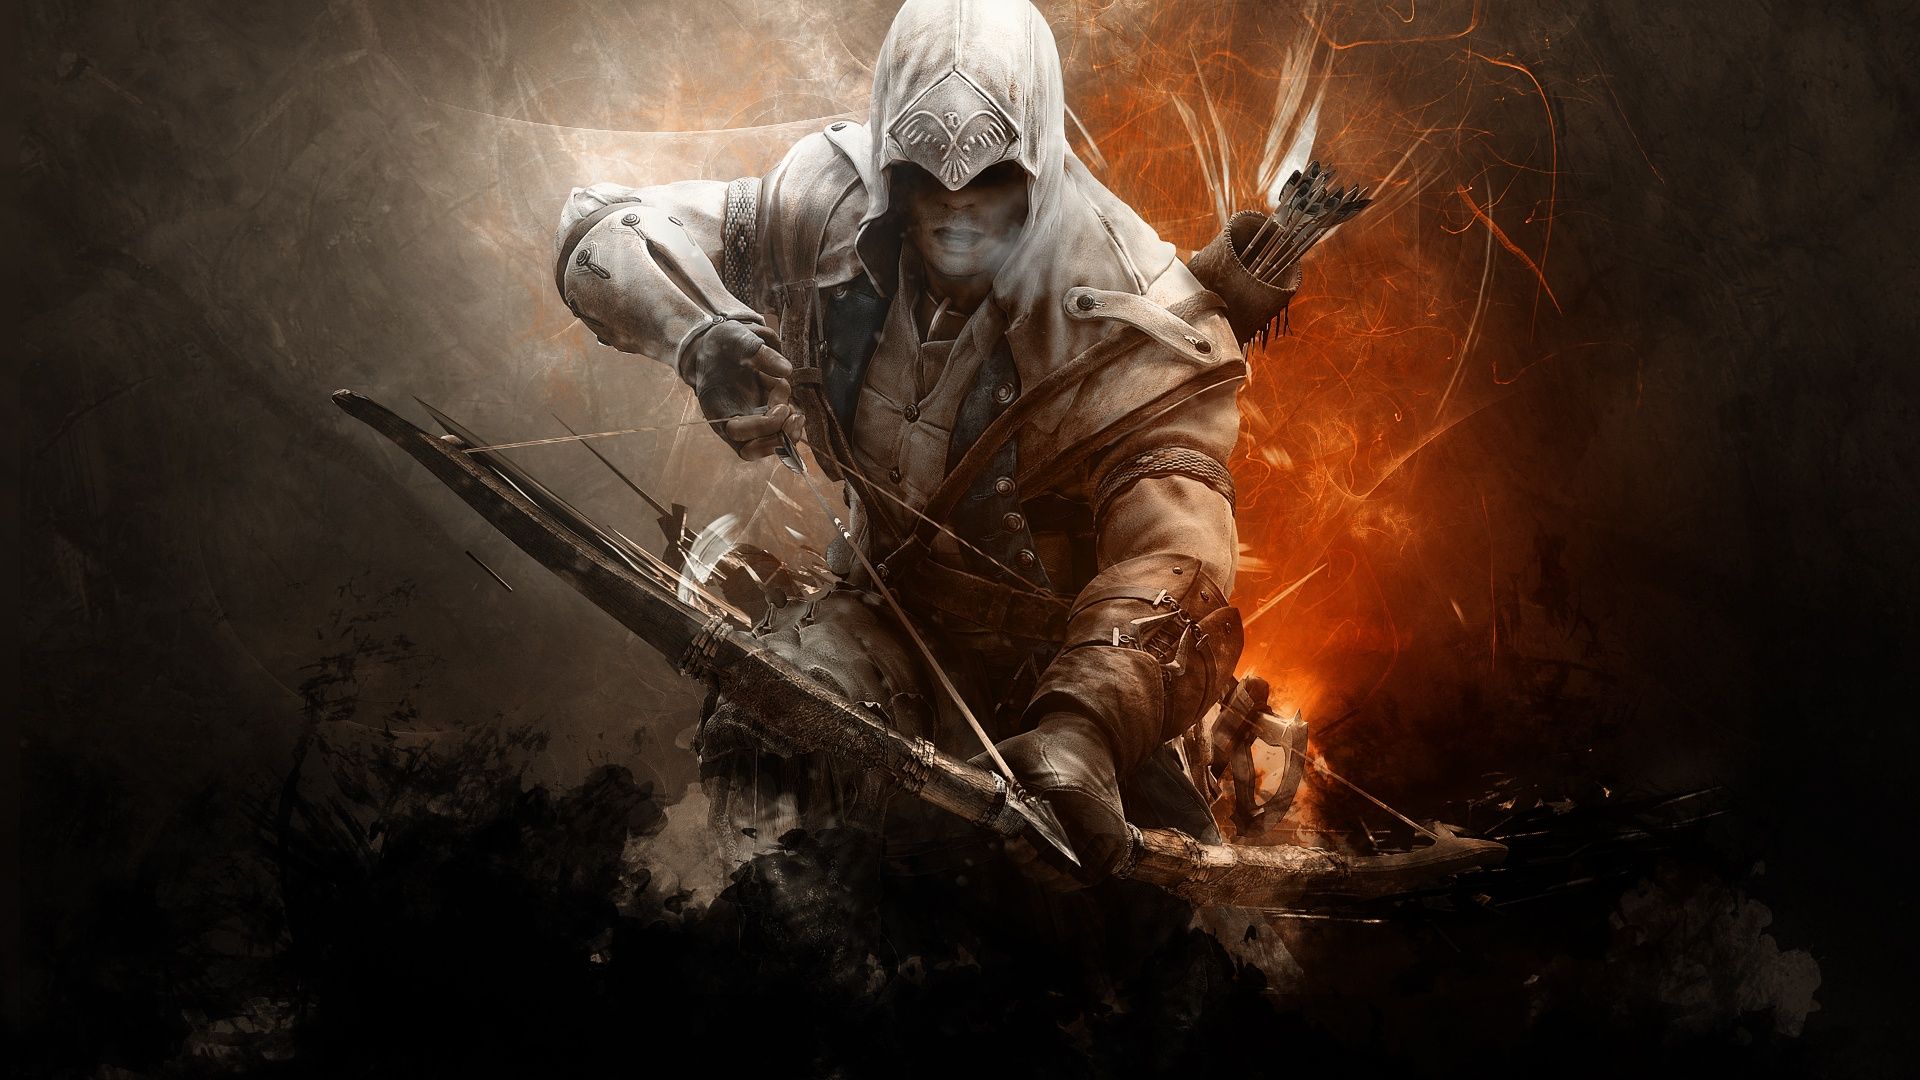 Assassins creed 3 connor game hd wallpaper wallpapers55.com